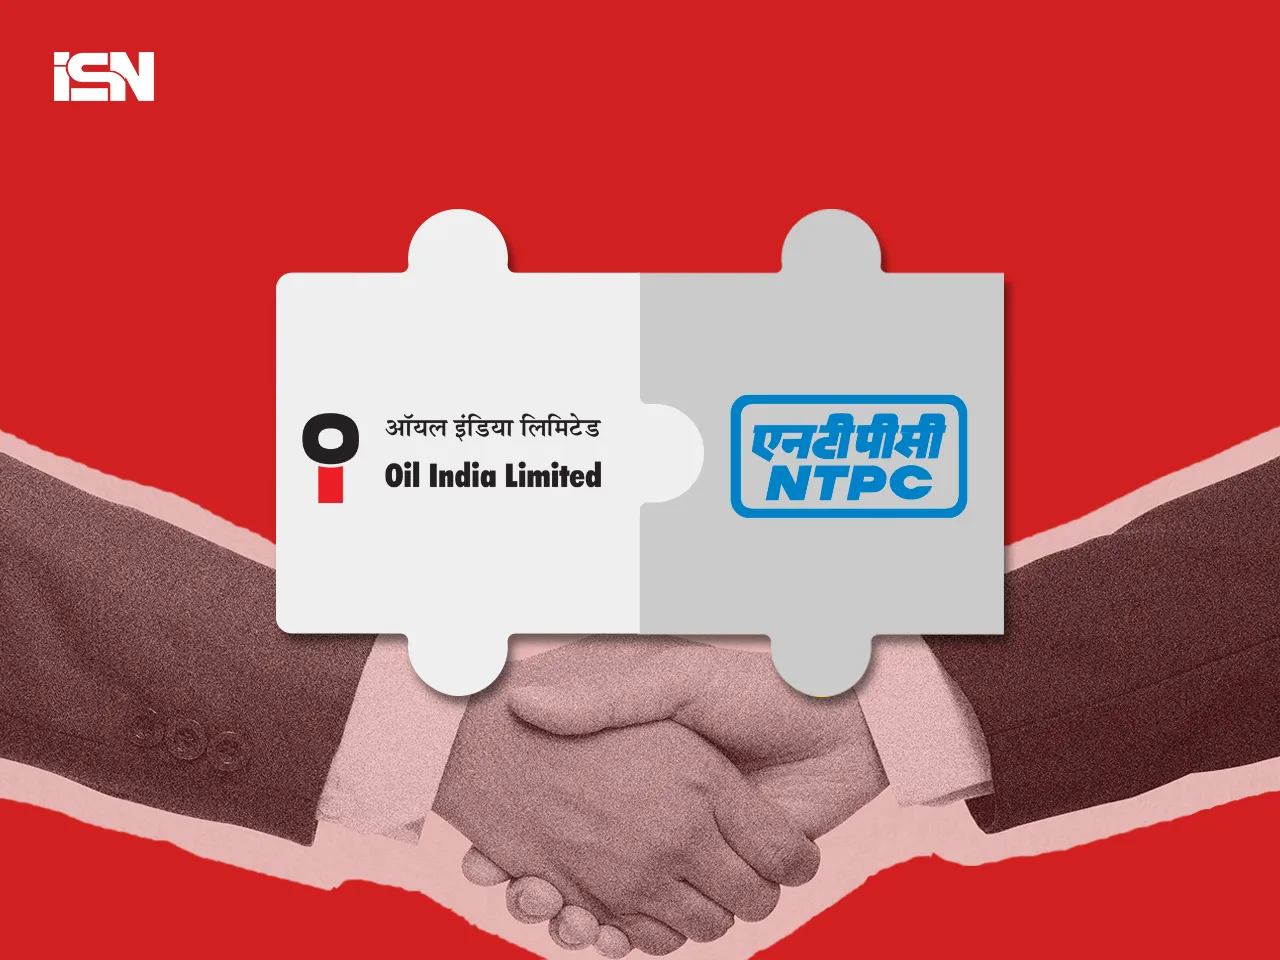 NTPC signs MoU with Oil India